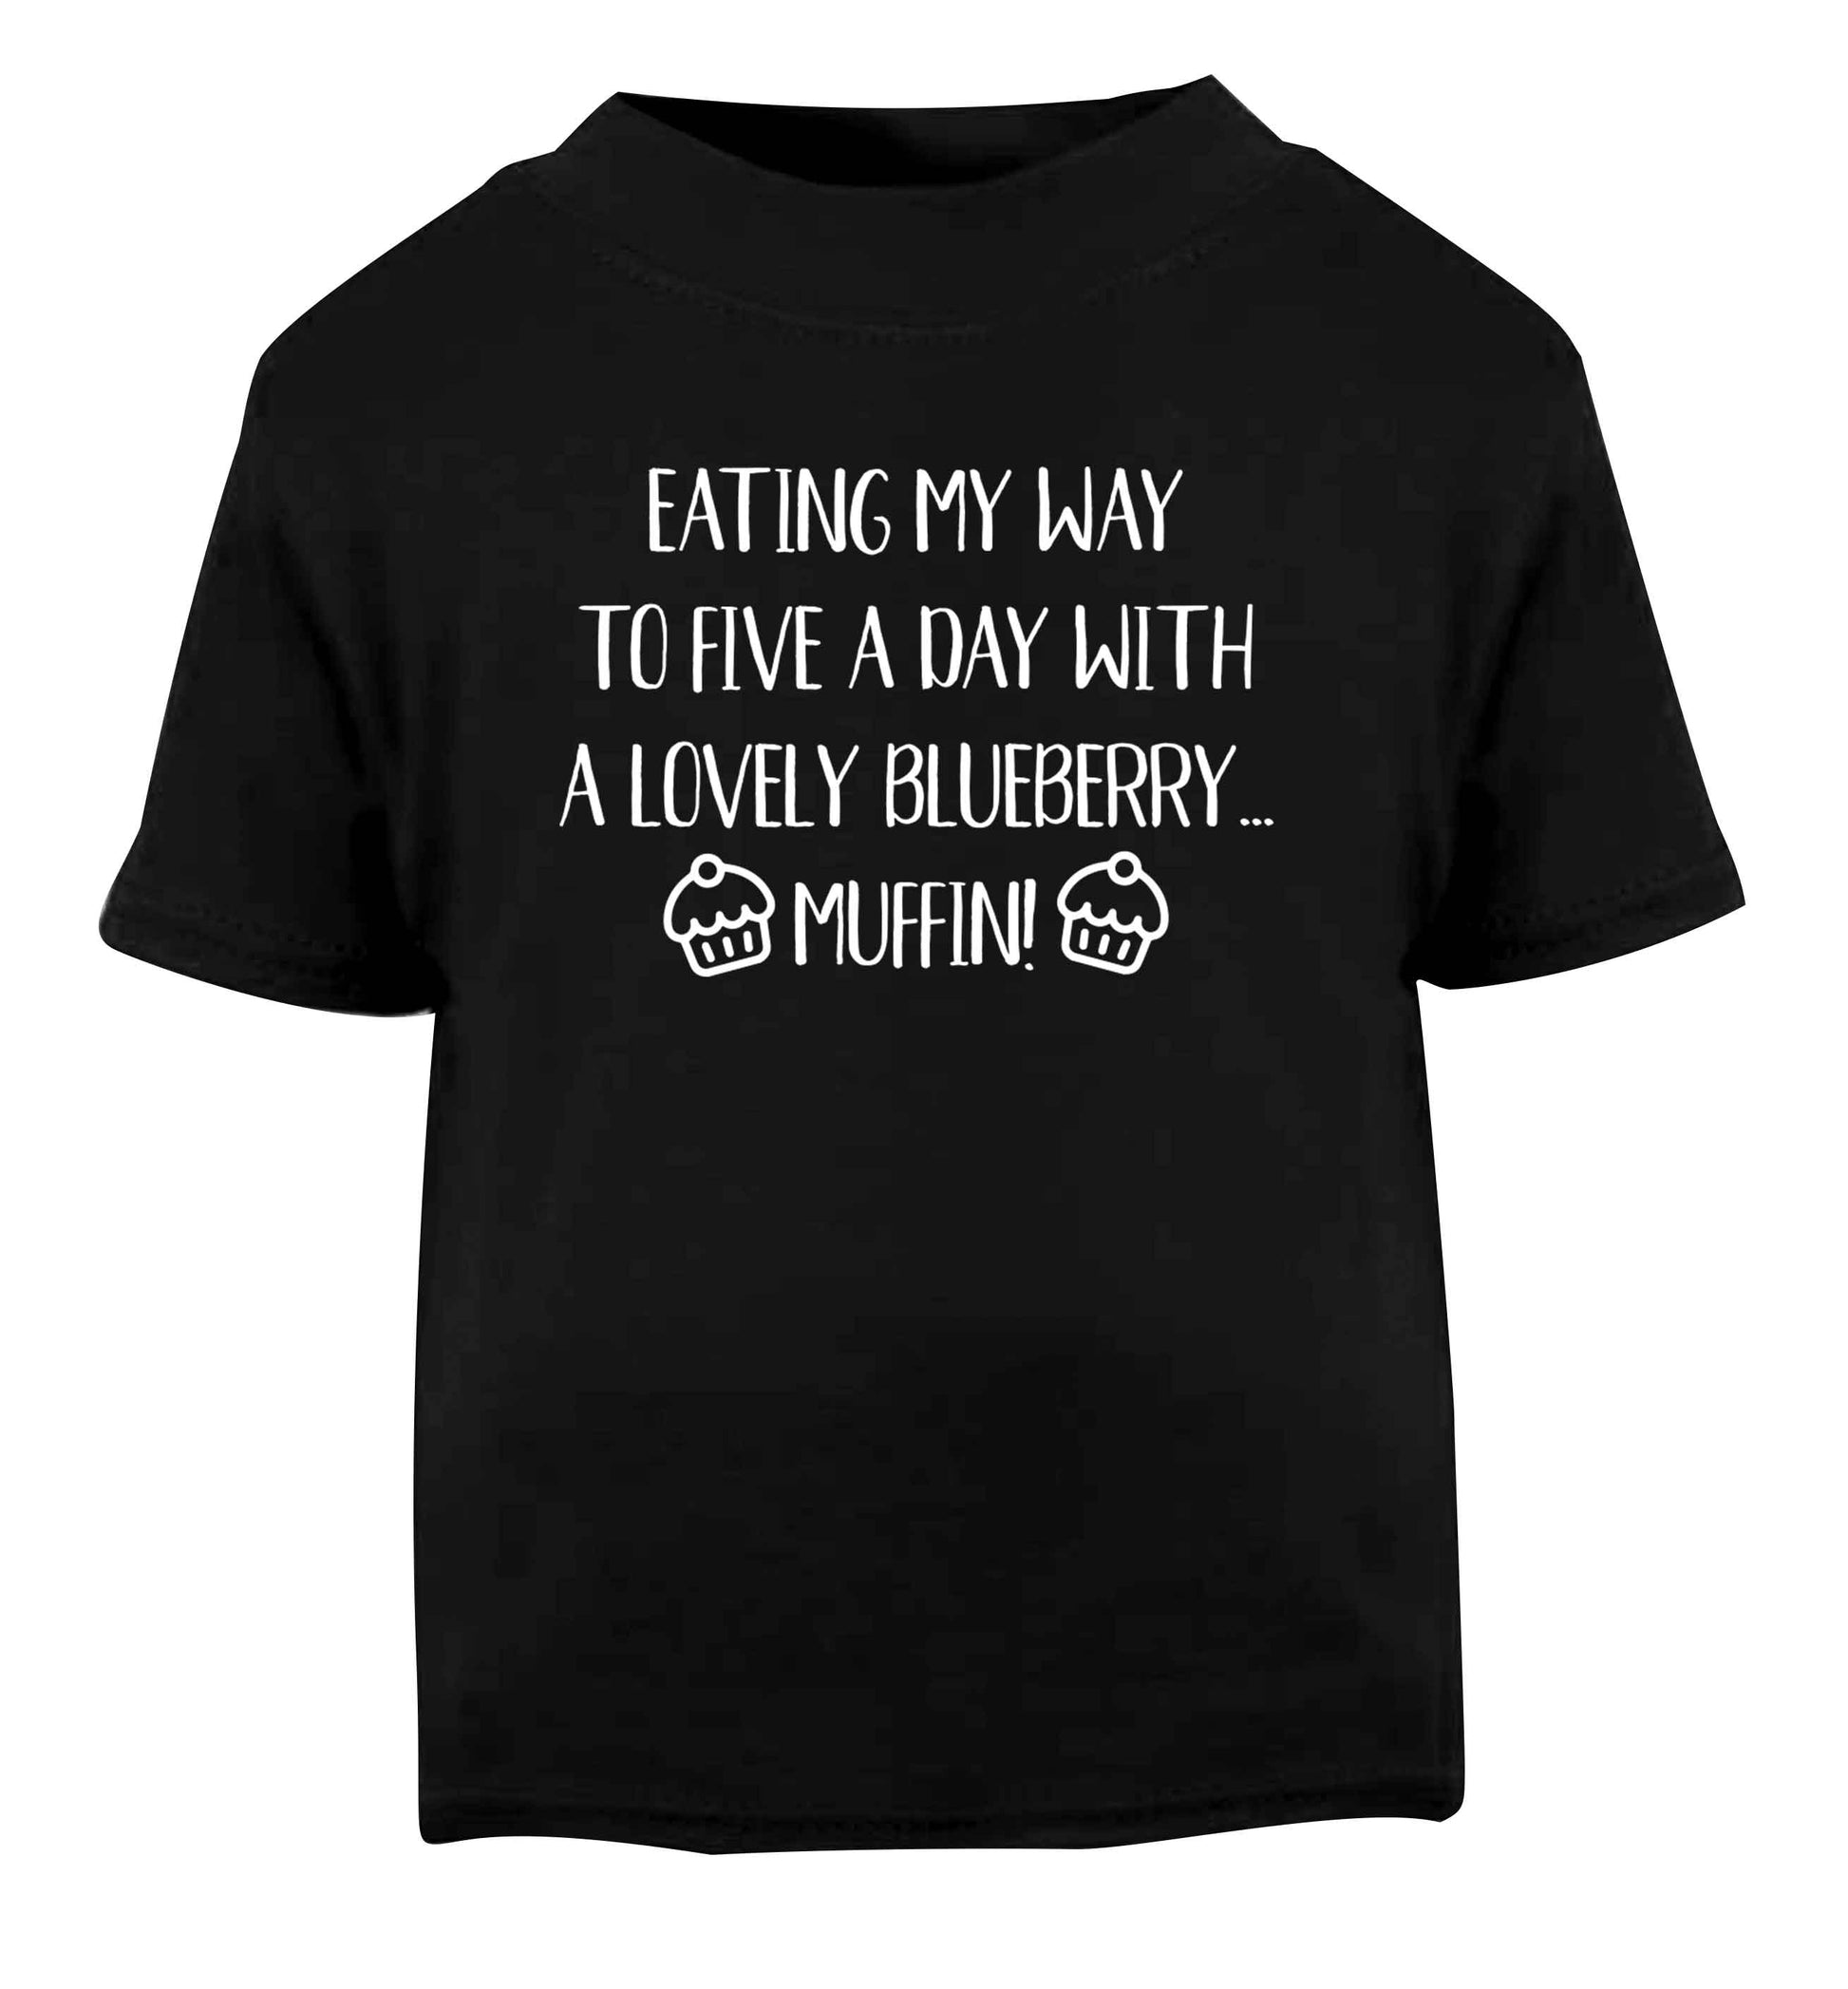 Eating my way to five a day with a lovely blueberry muffin Black Baby Toddler Tshirt 2 years